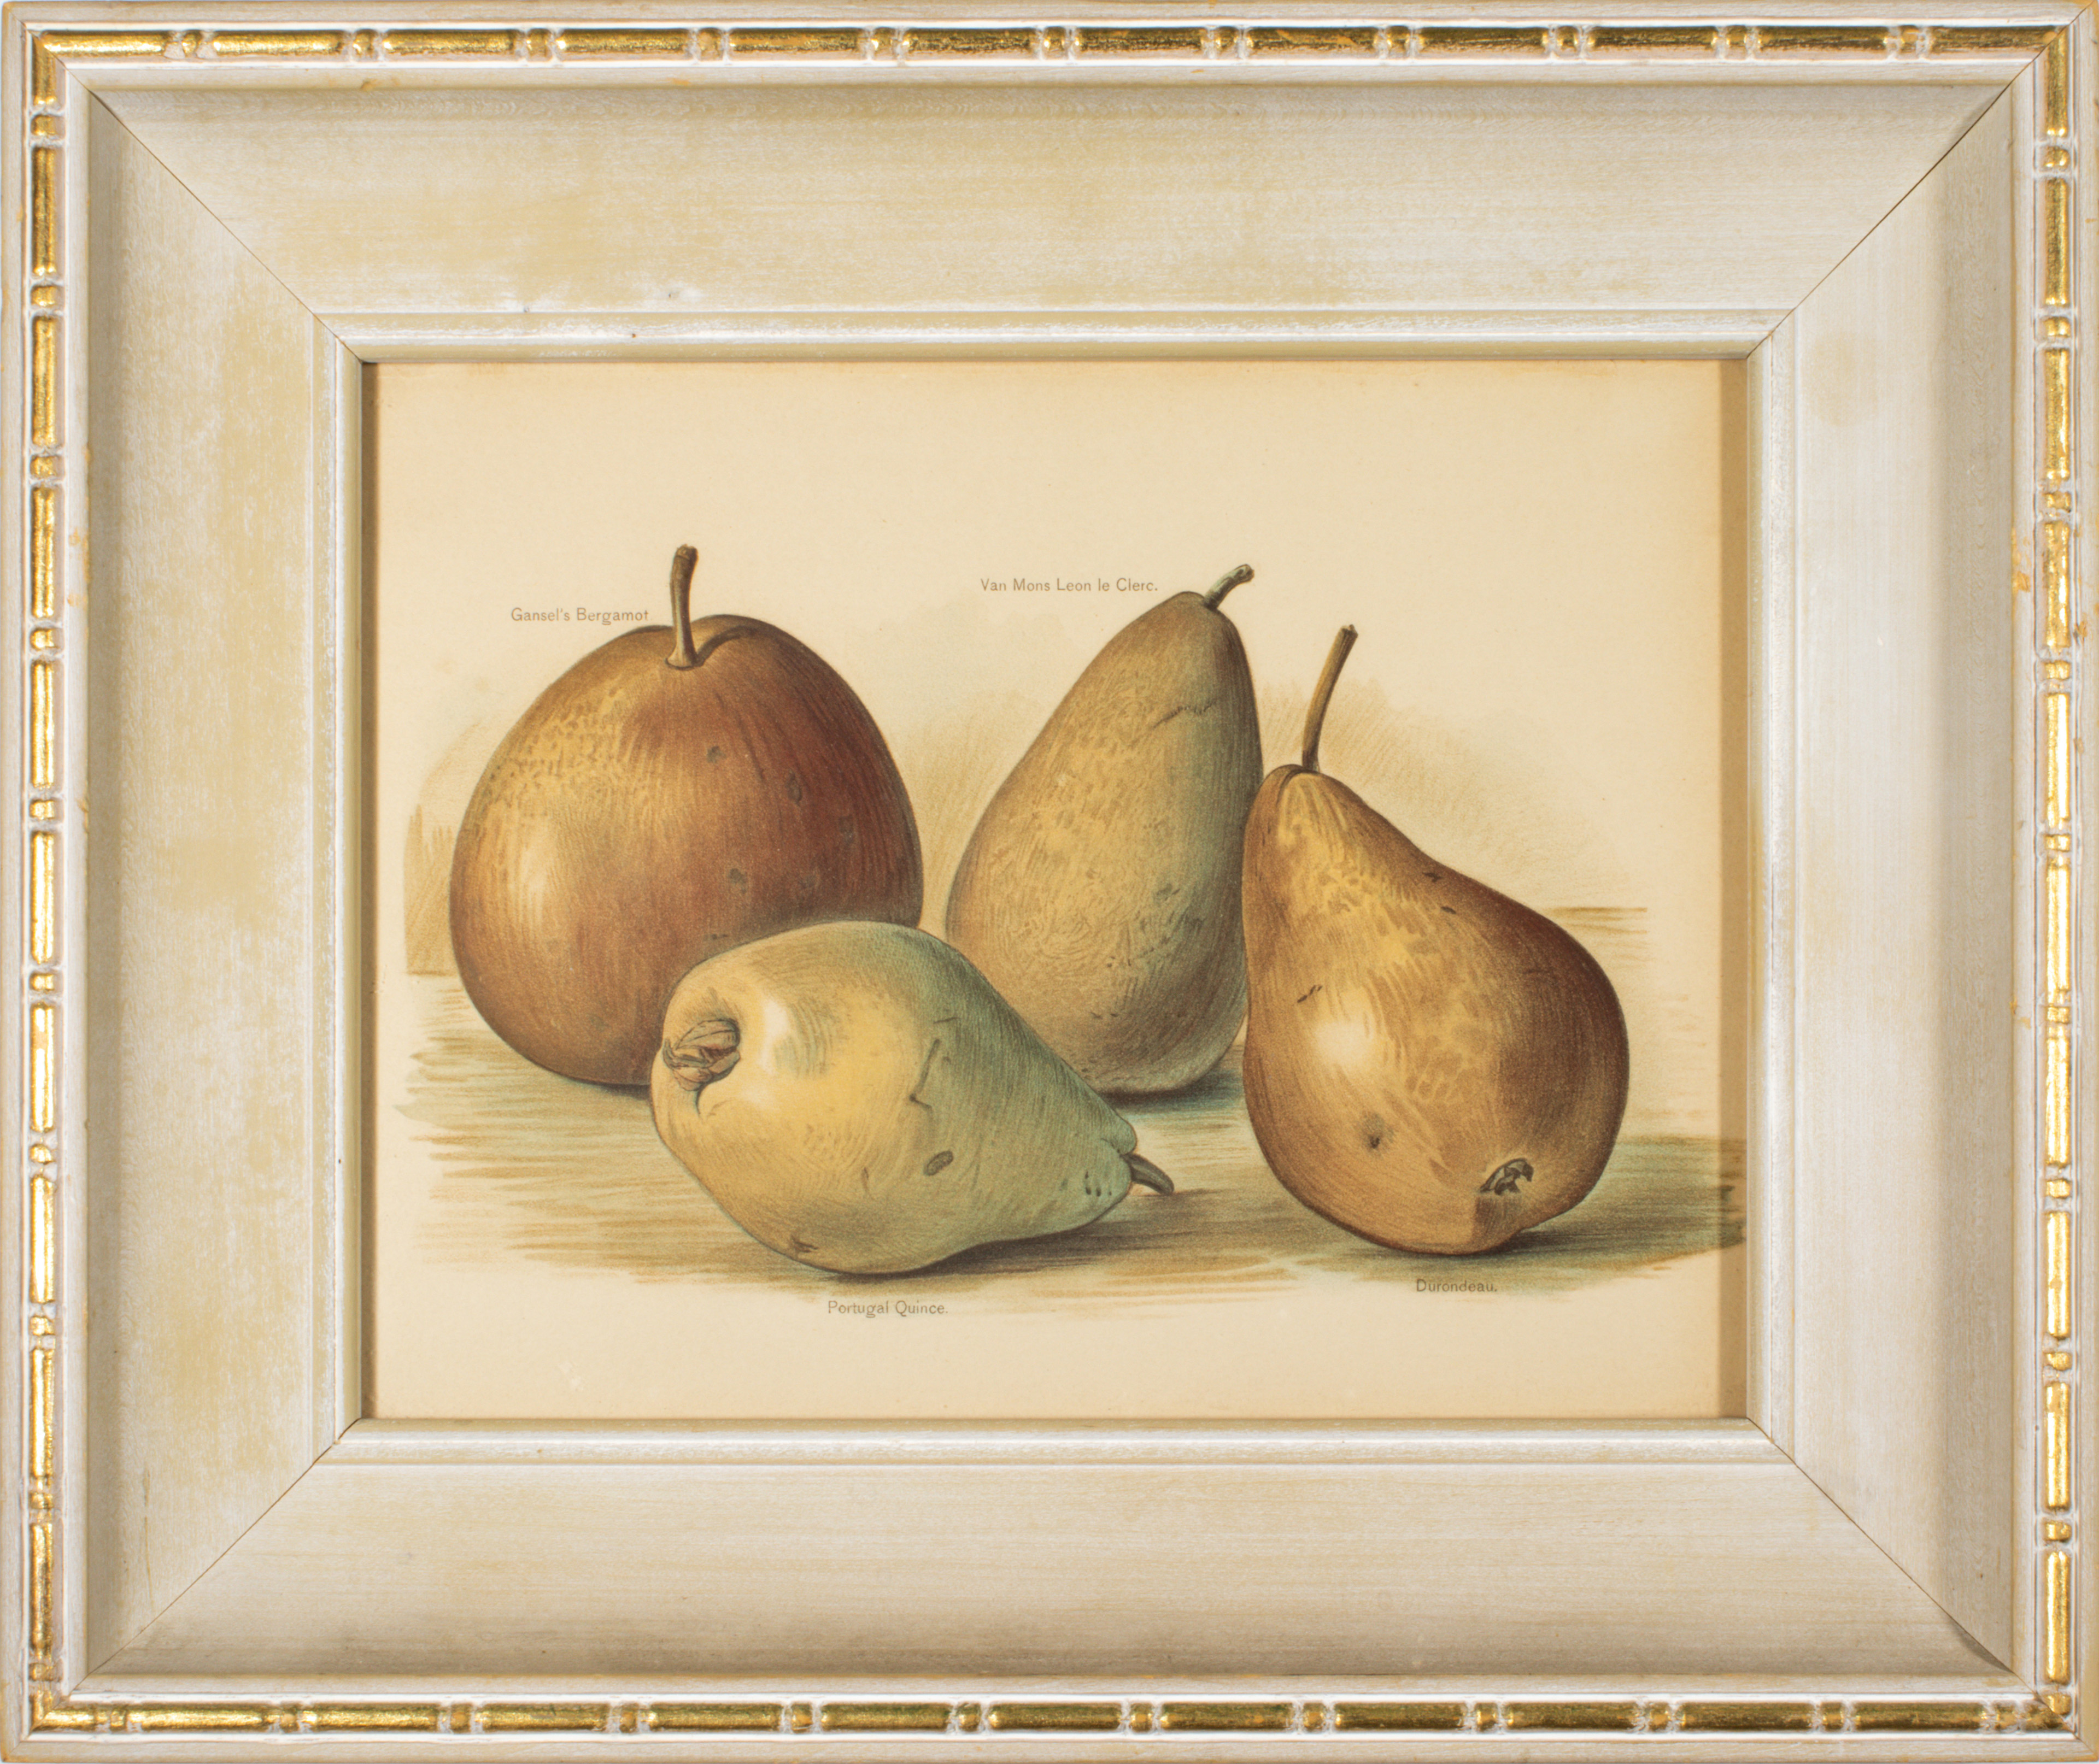 PRINTS, PEARS FROM THE FRUIT GROWER'S